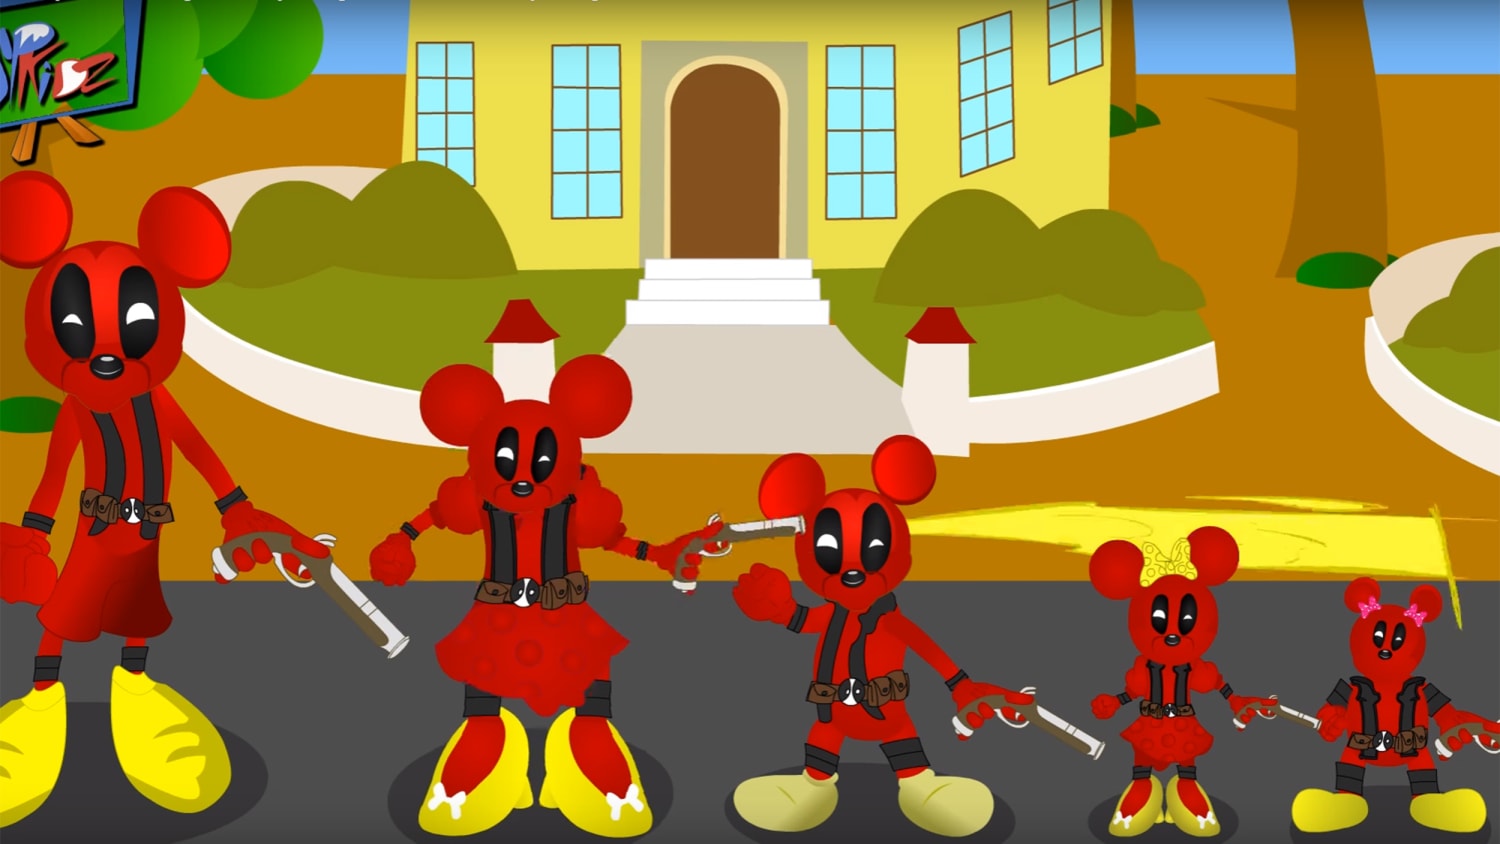 Disturbing YouTube Kids video shows Mickey Mouse with gun